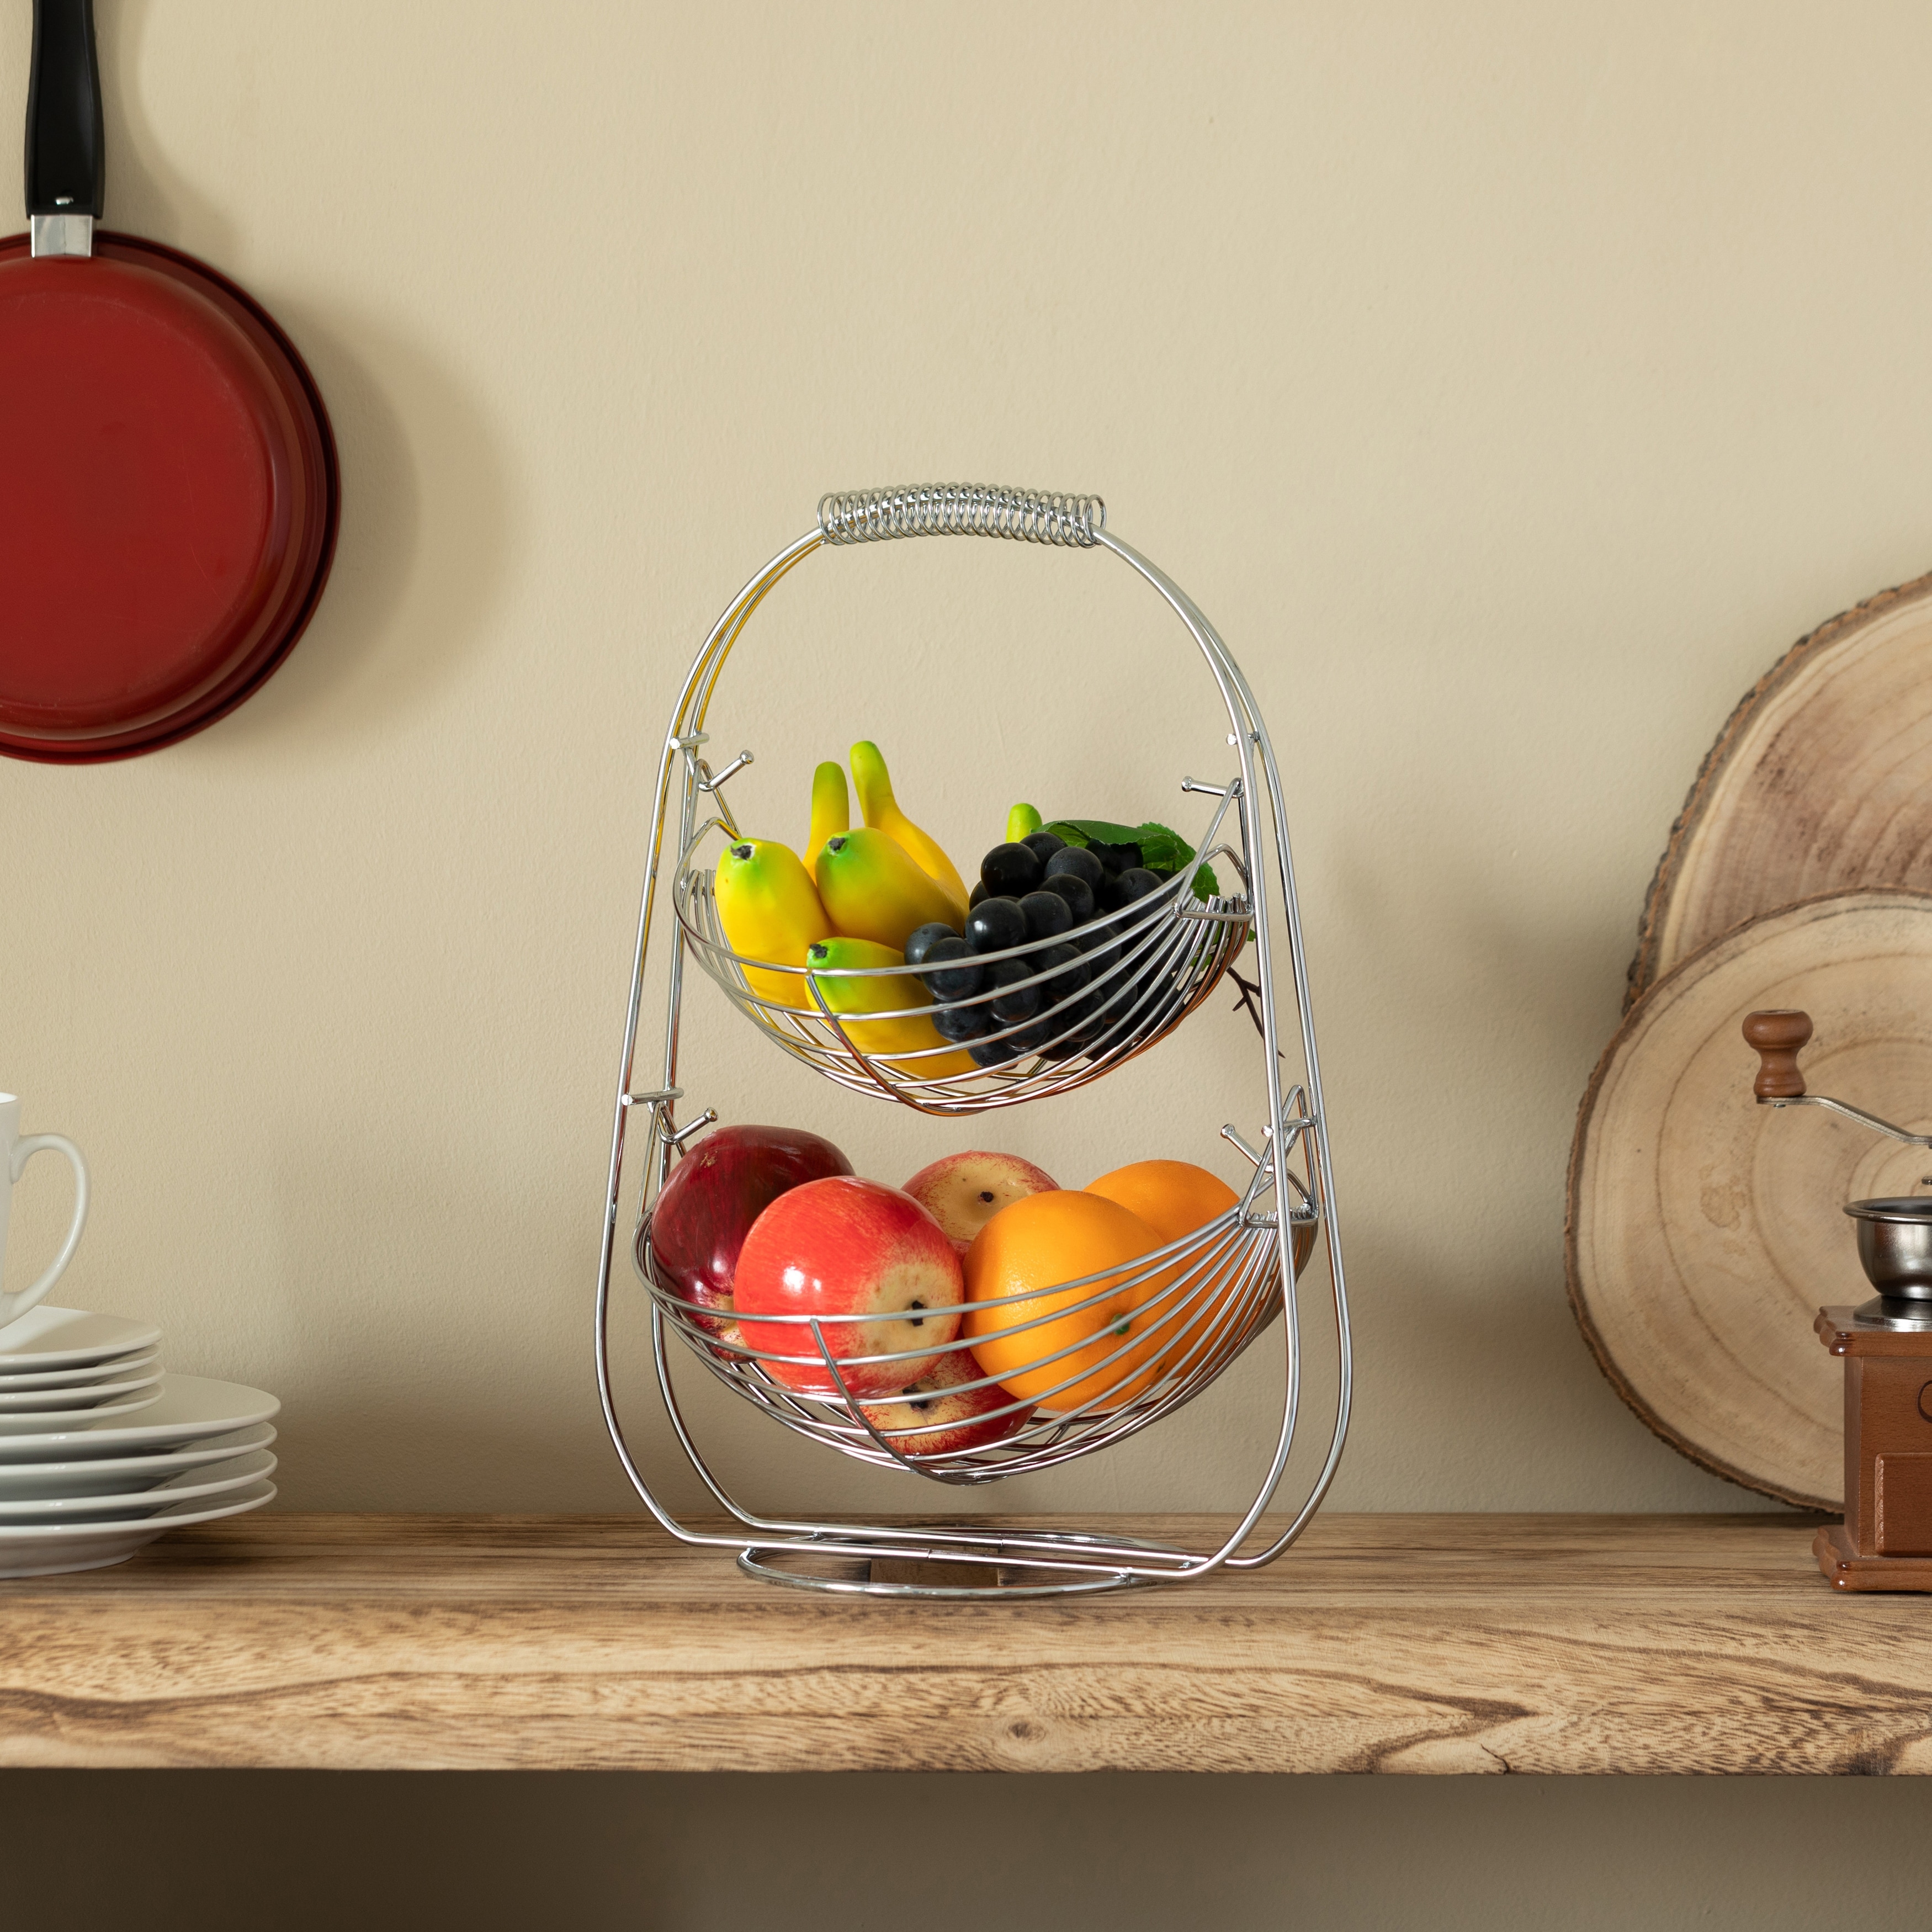 https://ak1.ostkcdn.com/images/products/is/images/direct/84874bef517fbc92c532612b1e479c98a484aaaf/2-Tier-Metal-Fruit-Holder-Swing-Basket-for-Kitchen-Detachable-Countertop-Vegetables-Storage-Organizer-with-Display-Hammock-Stand.jpg